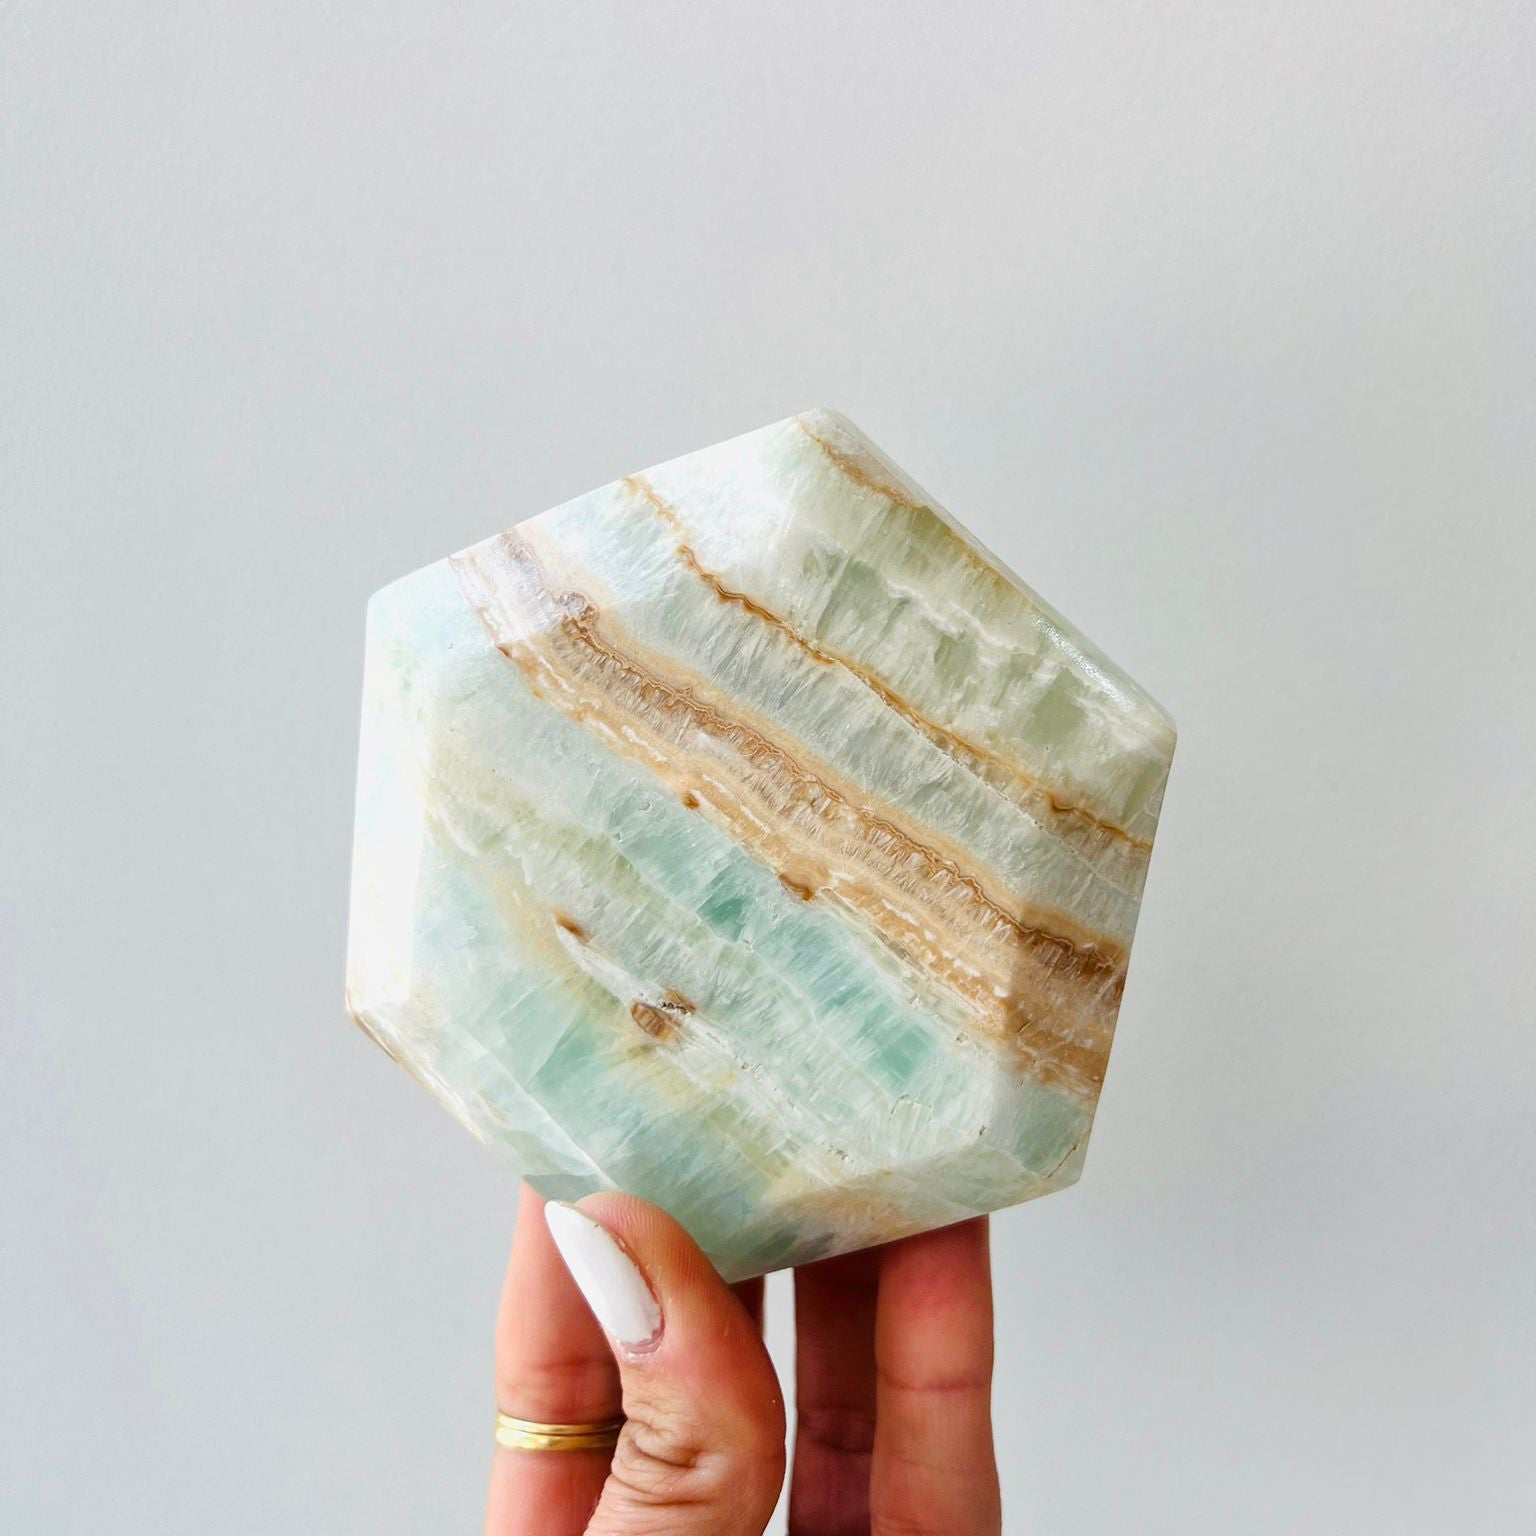 Caribbean Calcite: A Stone of Calm and Metamorphosis